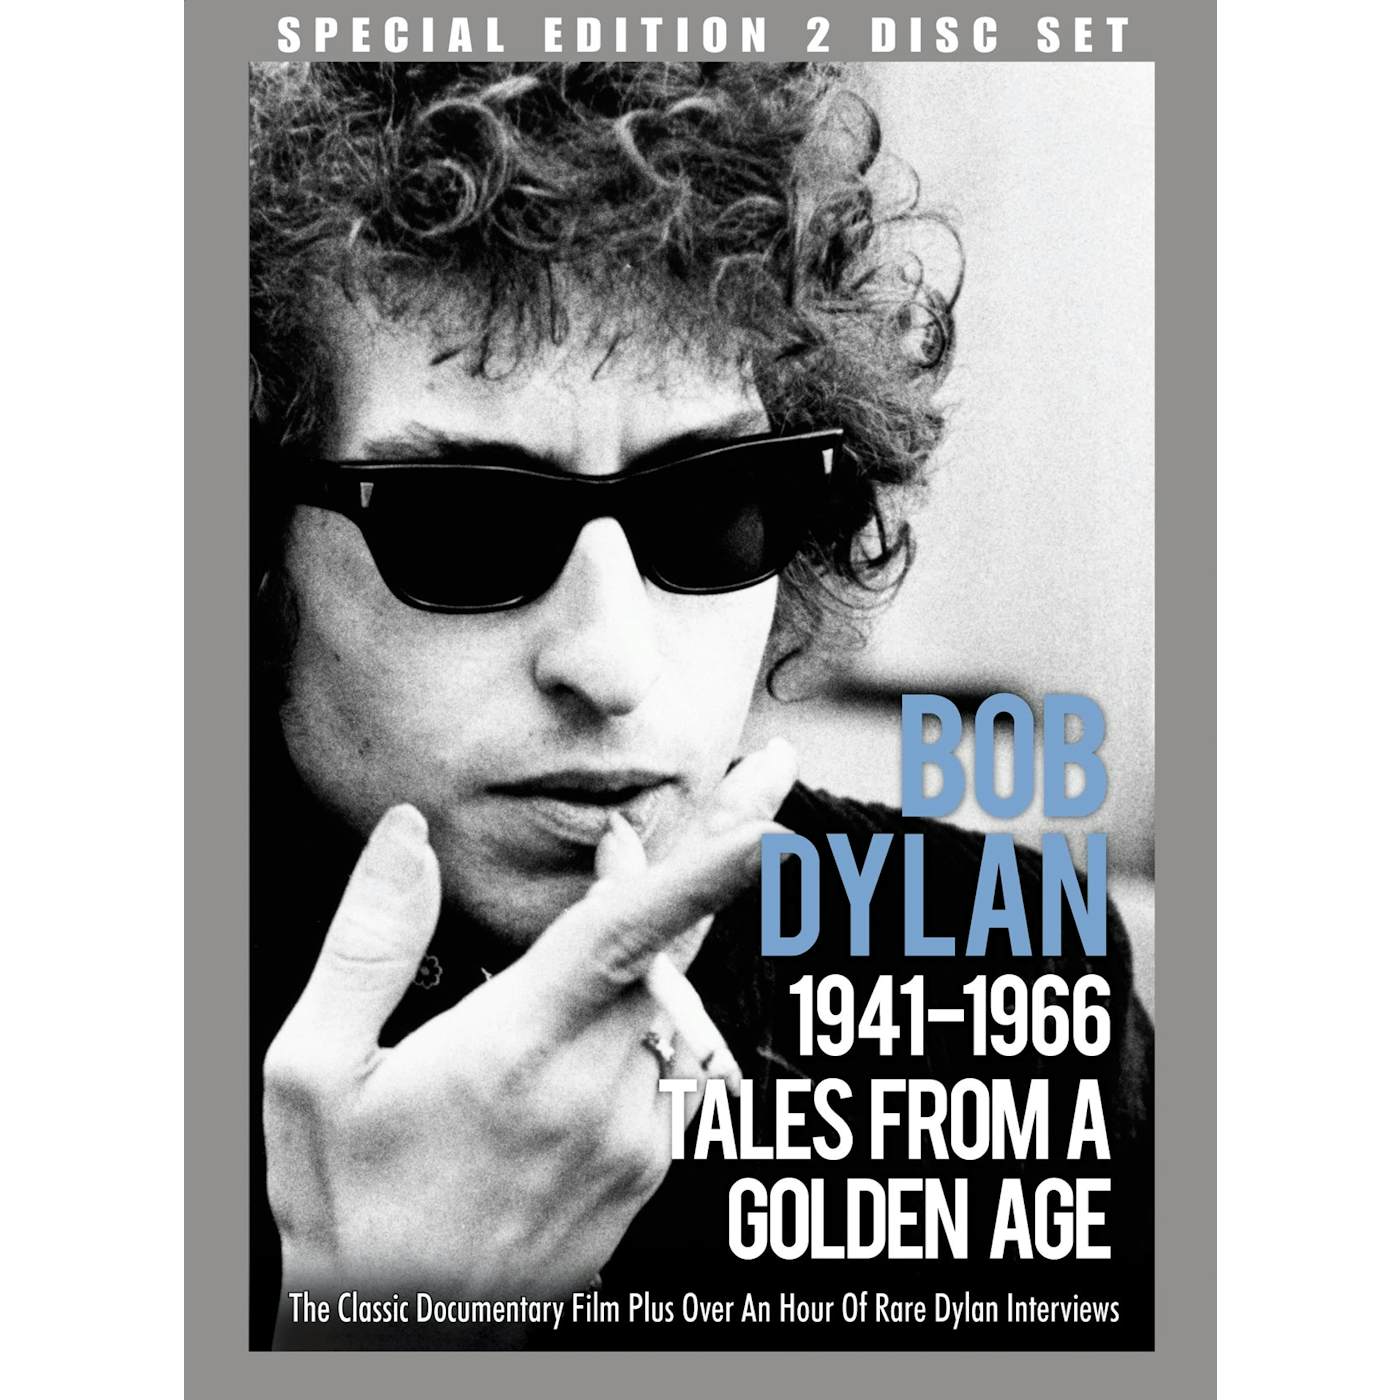 Bob Dylan DVD - Tales From A Golden Age 1941-1966 (Special Edition Dvd+Cd)